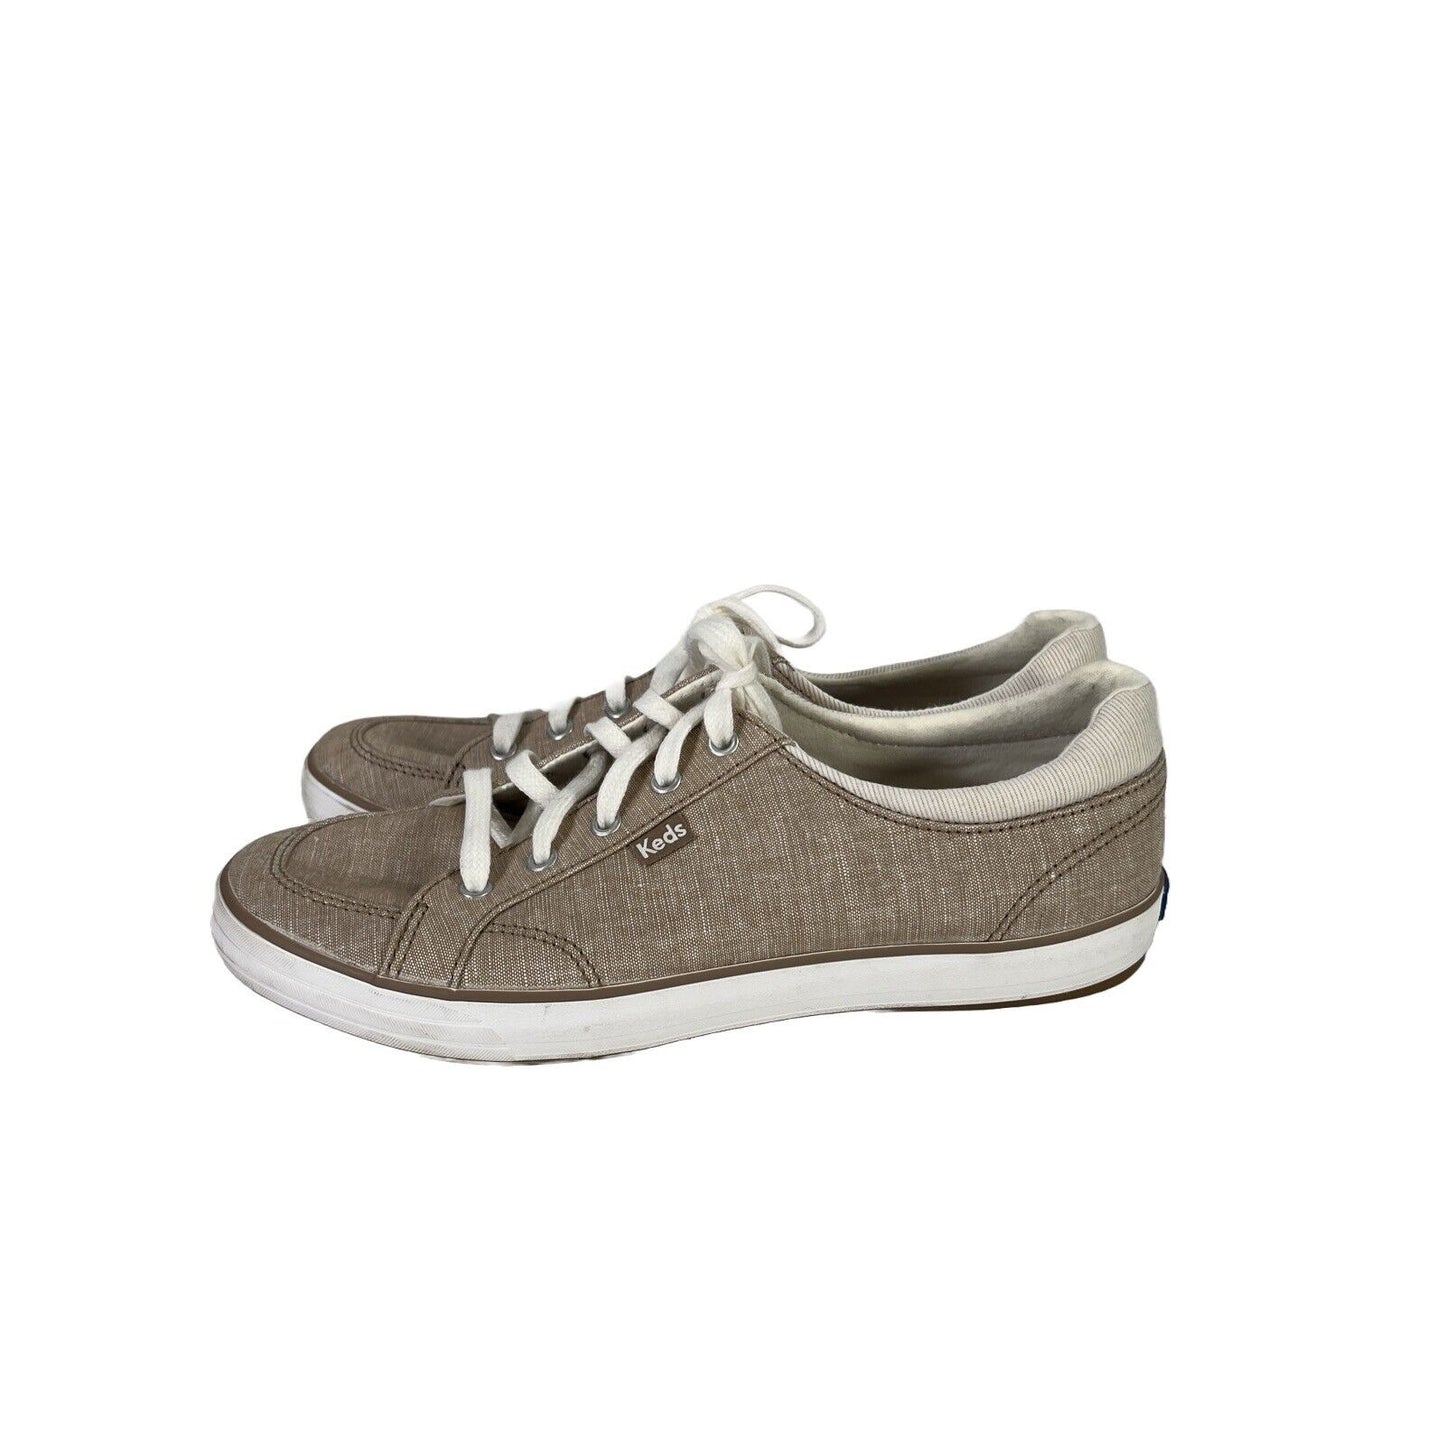 Keds Women's Beige Center II Lace Up Casual Sneakers - 8.5